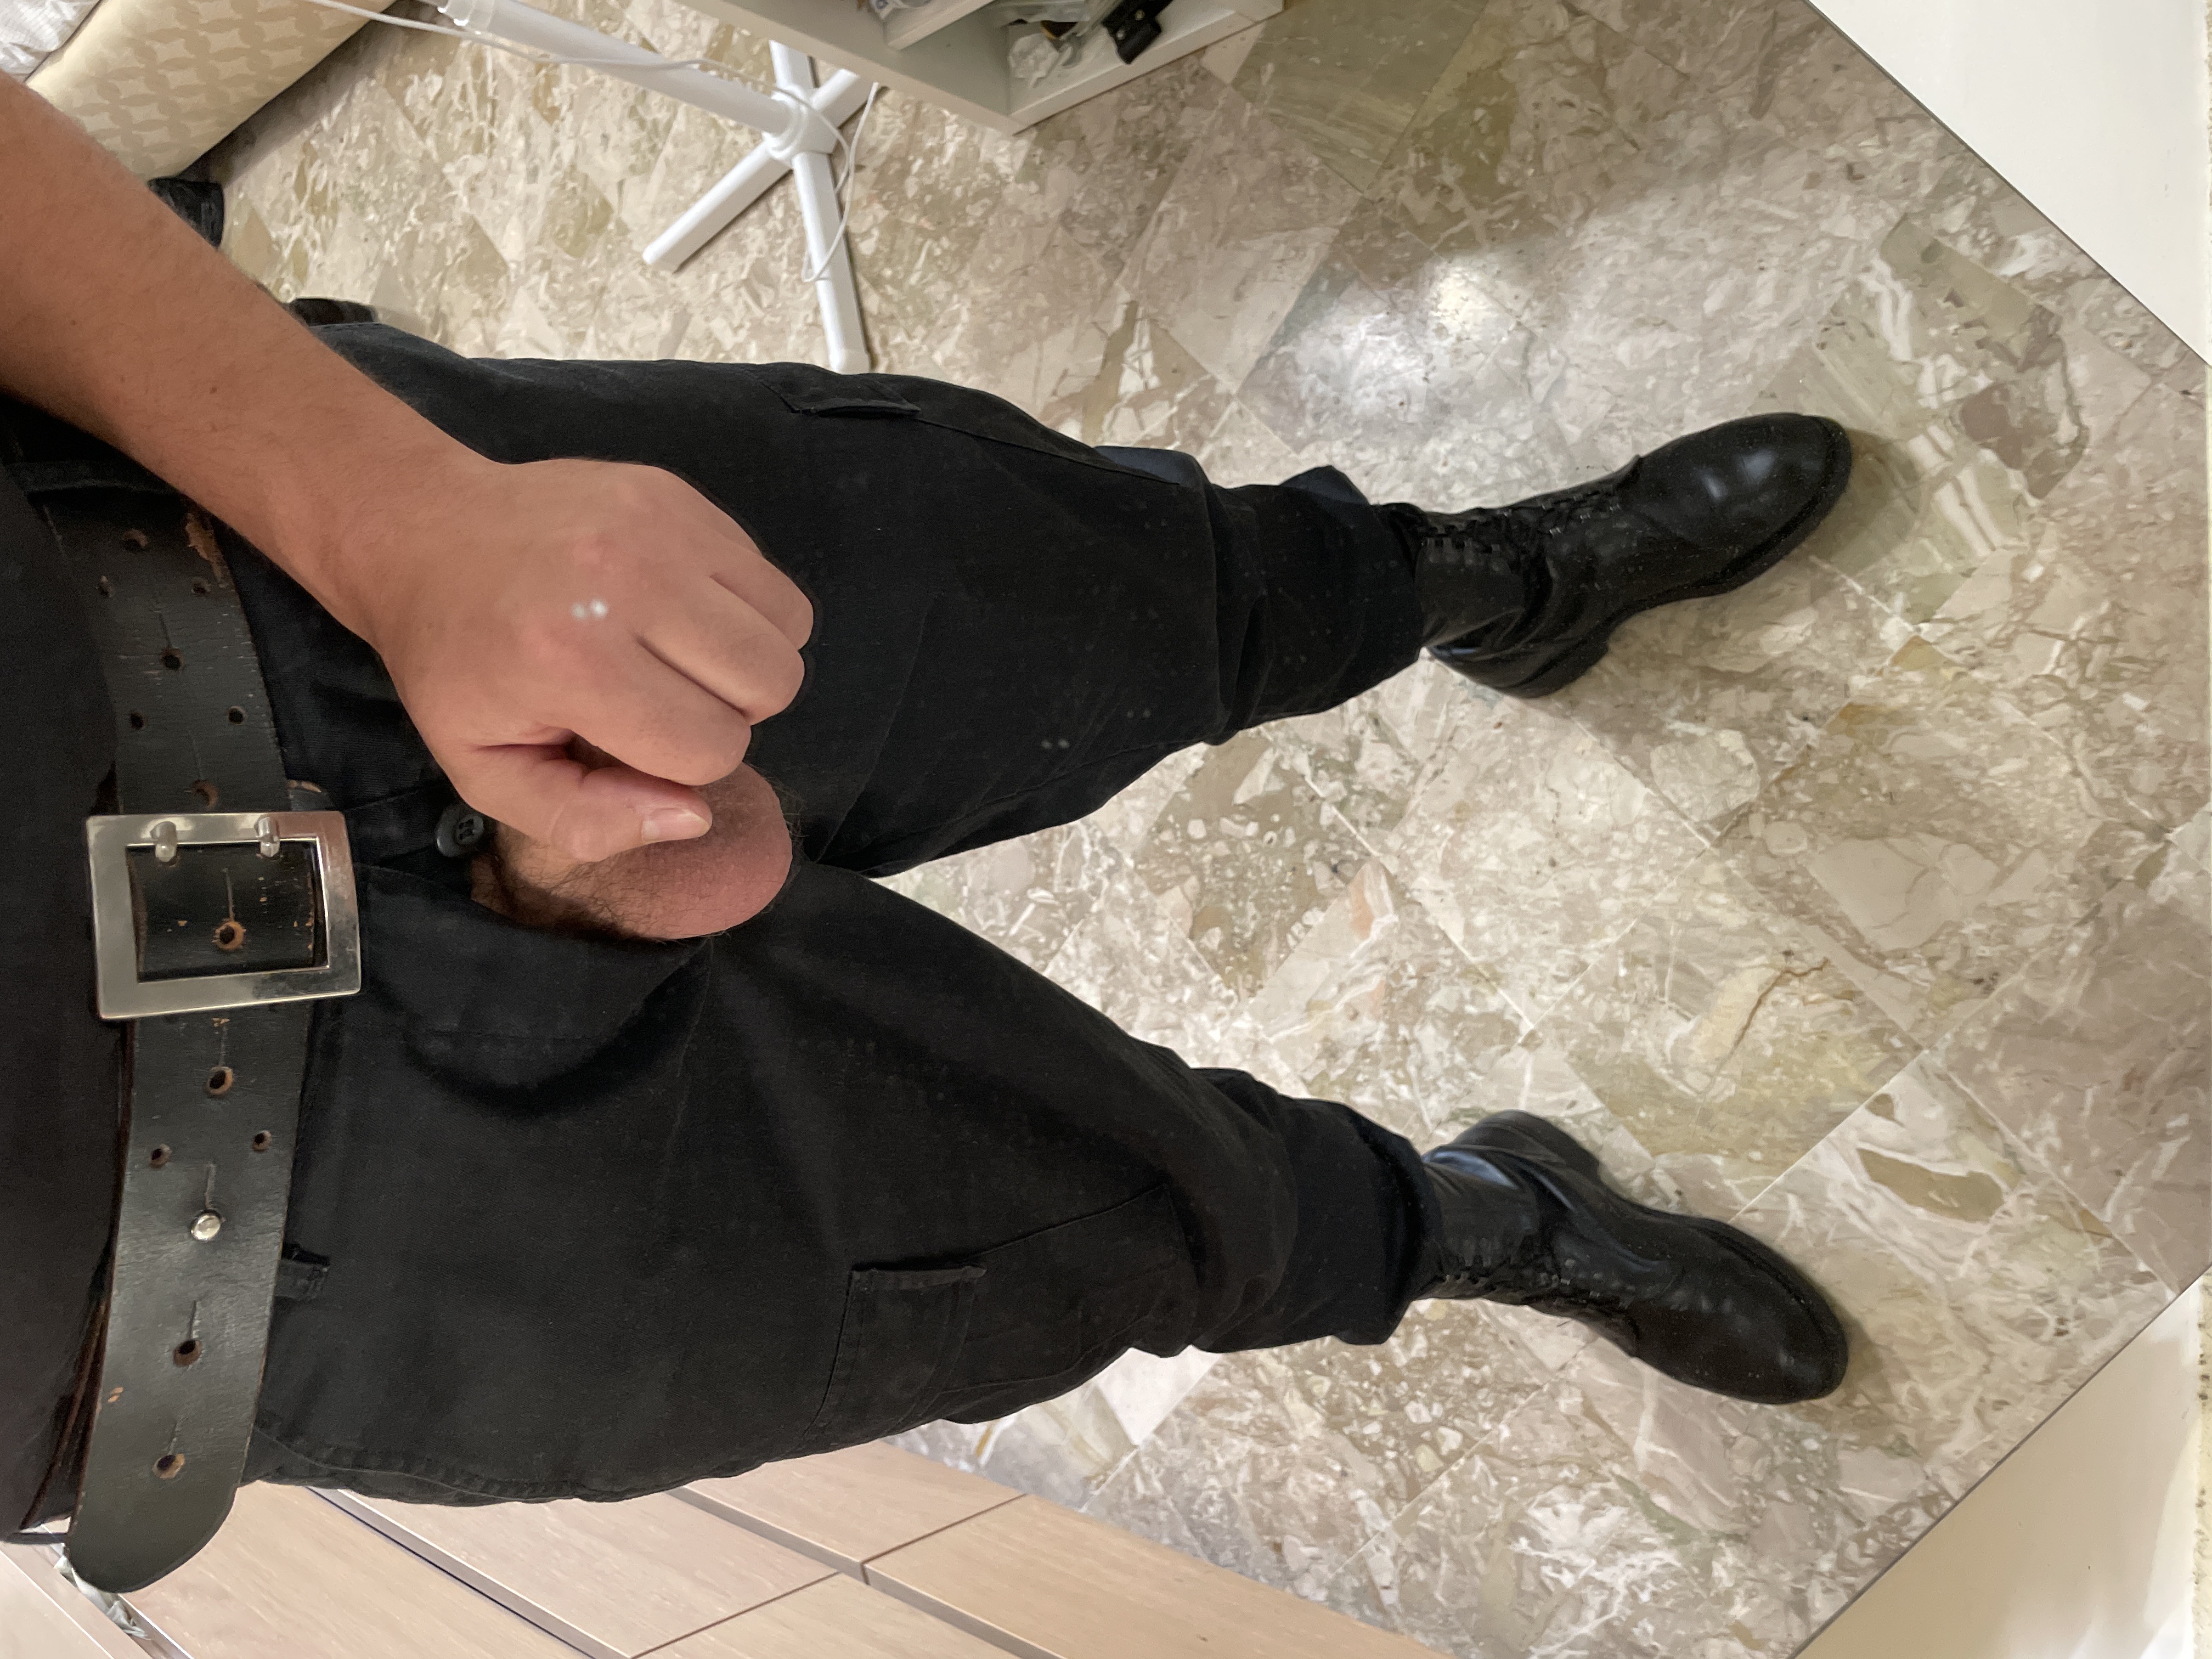 Military gay in boots and belt